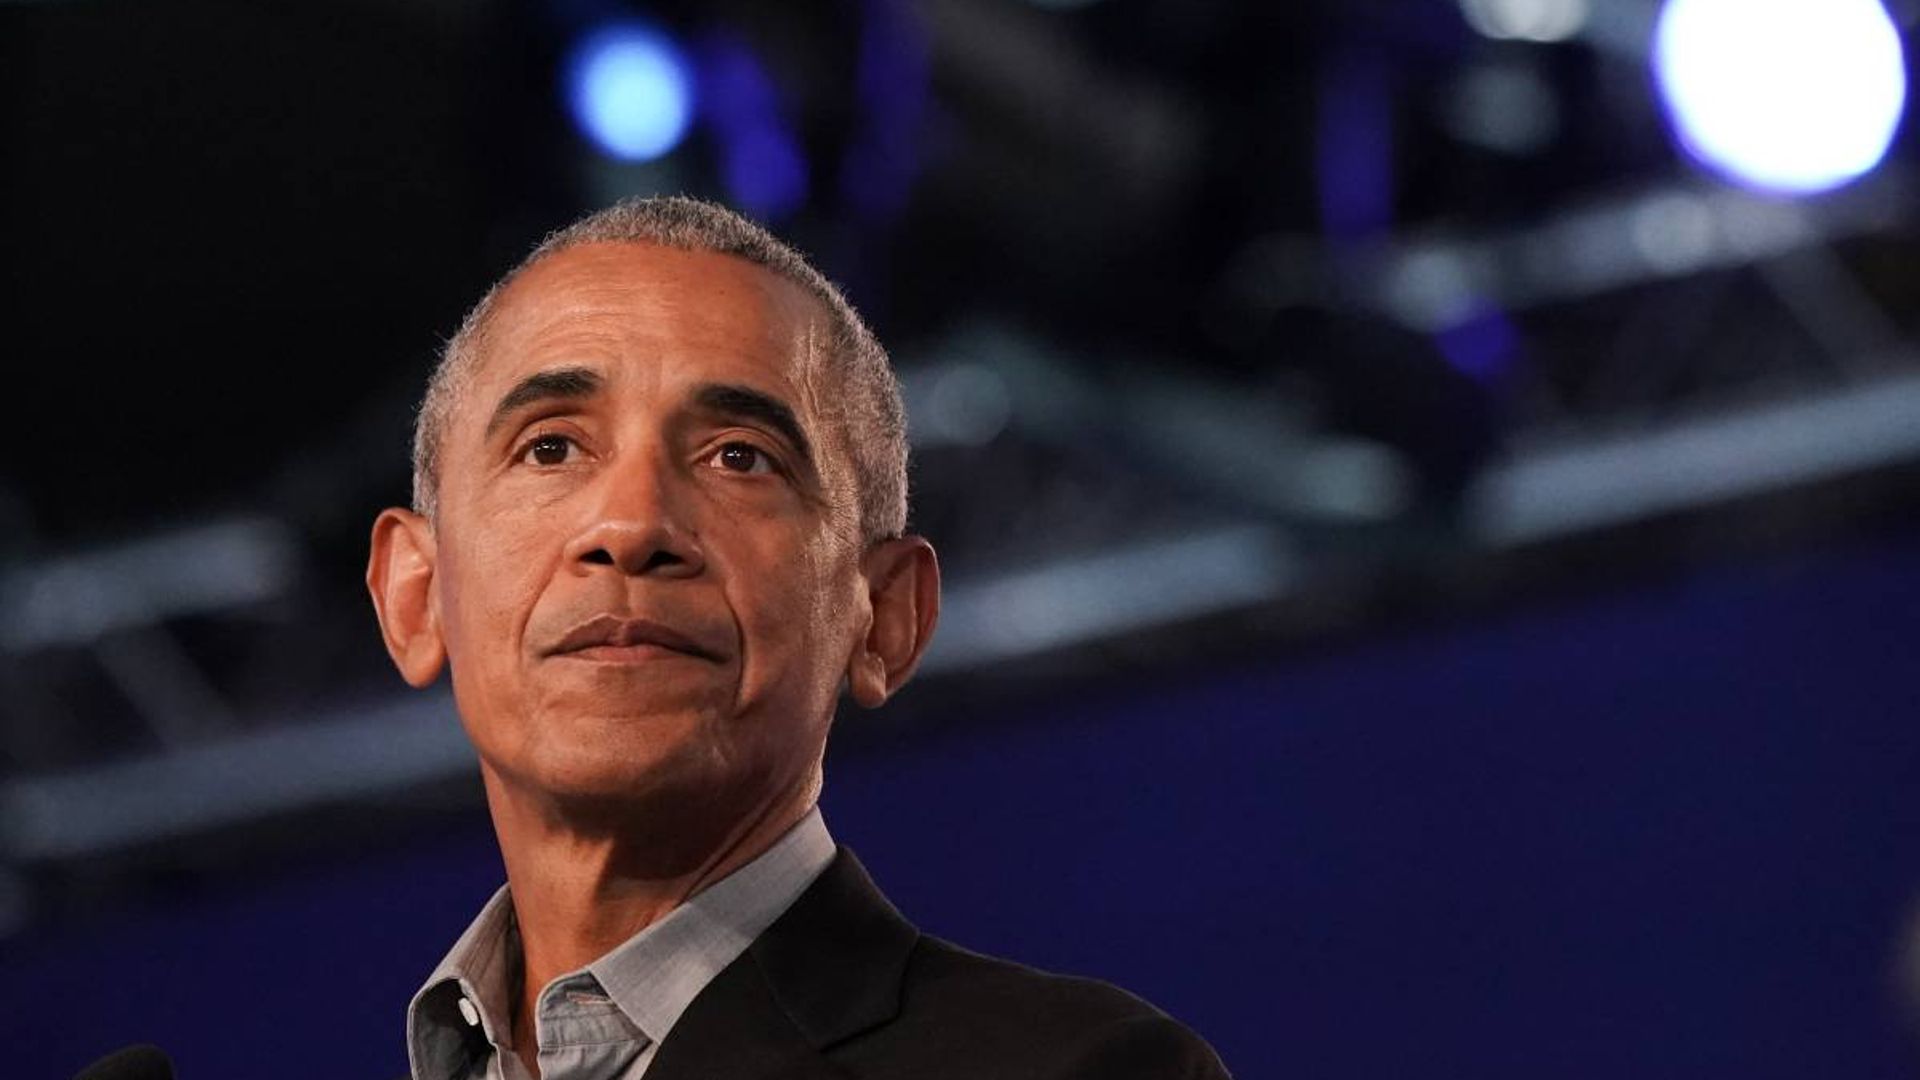 Barack Obama reveals he has tested positive for COVID-19